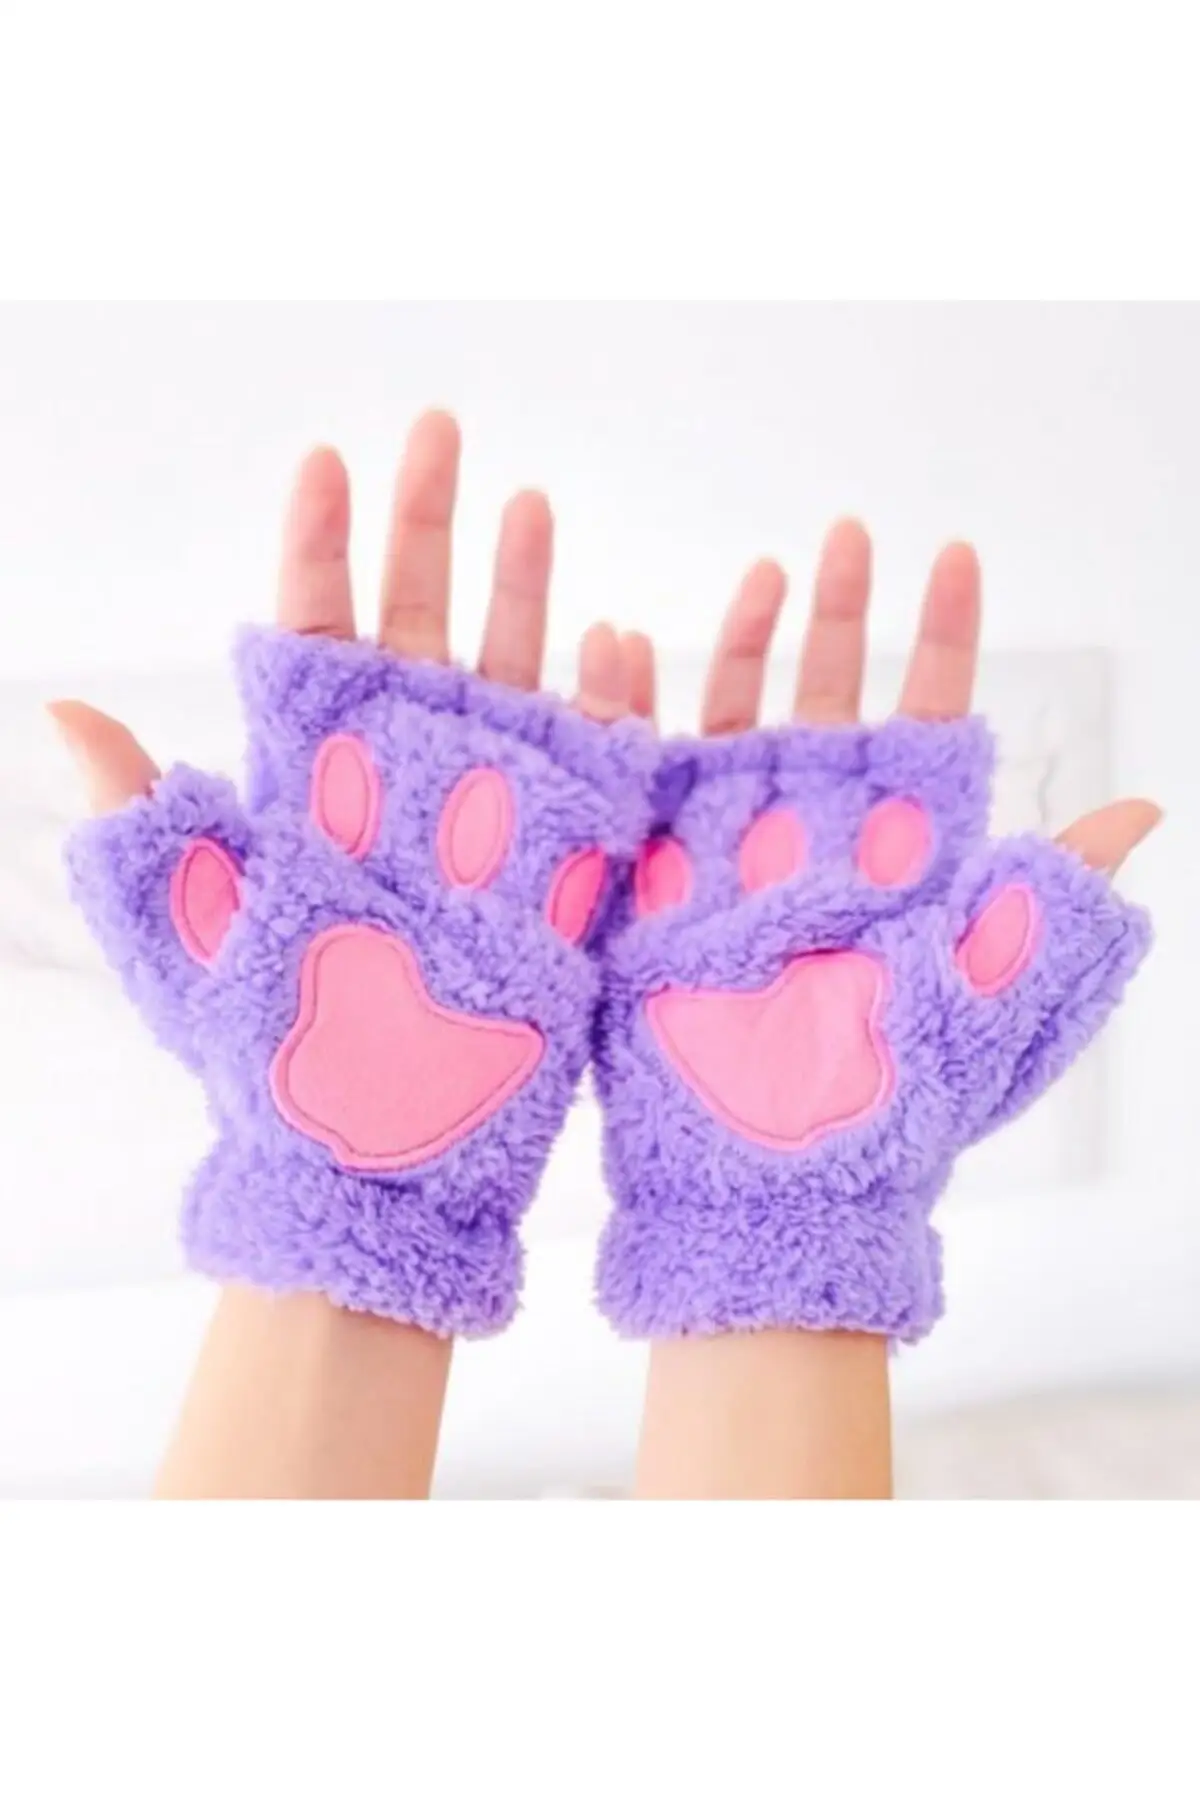 wool paw gloves for women, winter women's products, warm accessories, fingerless gloves winter fingerless gloves 005 fit 18mm snap button fashion accessories charms jewelry for women teenagers girl christmas gift